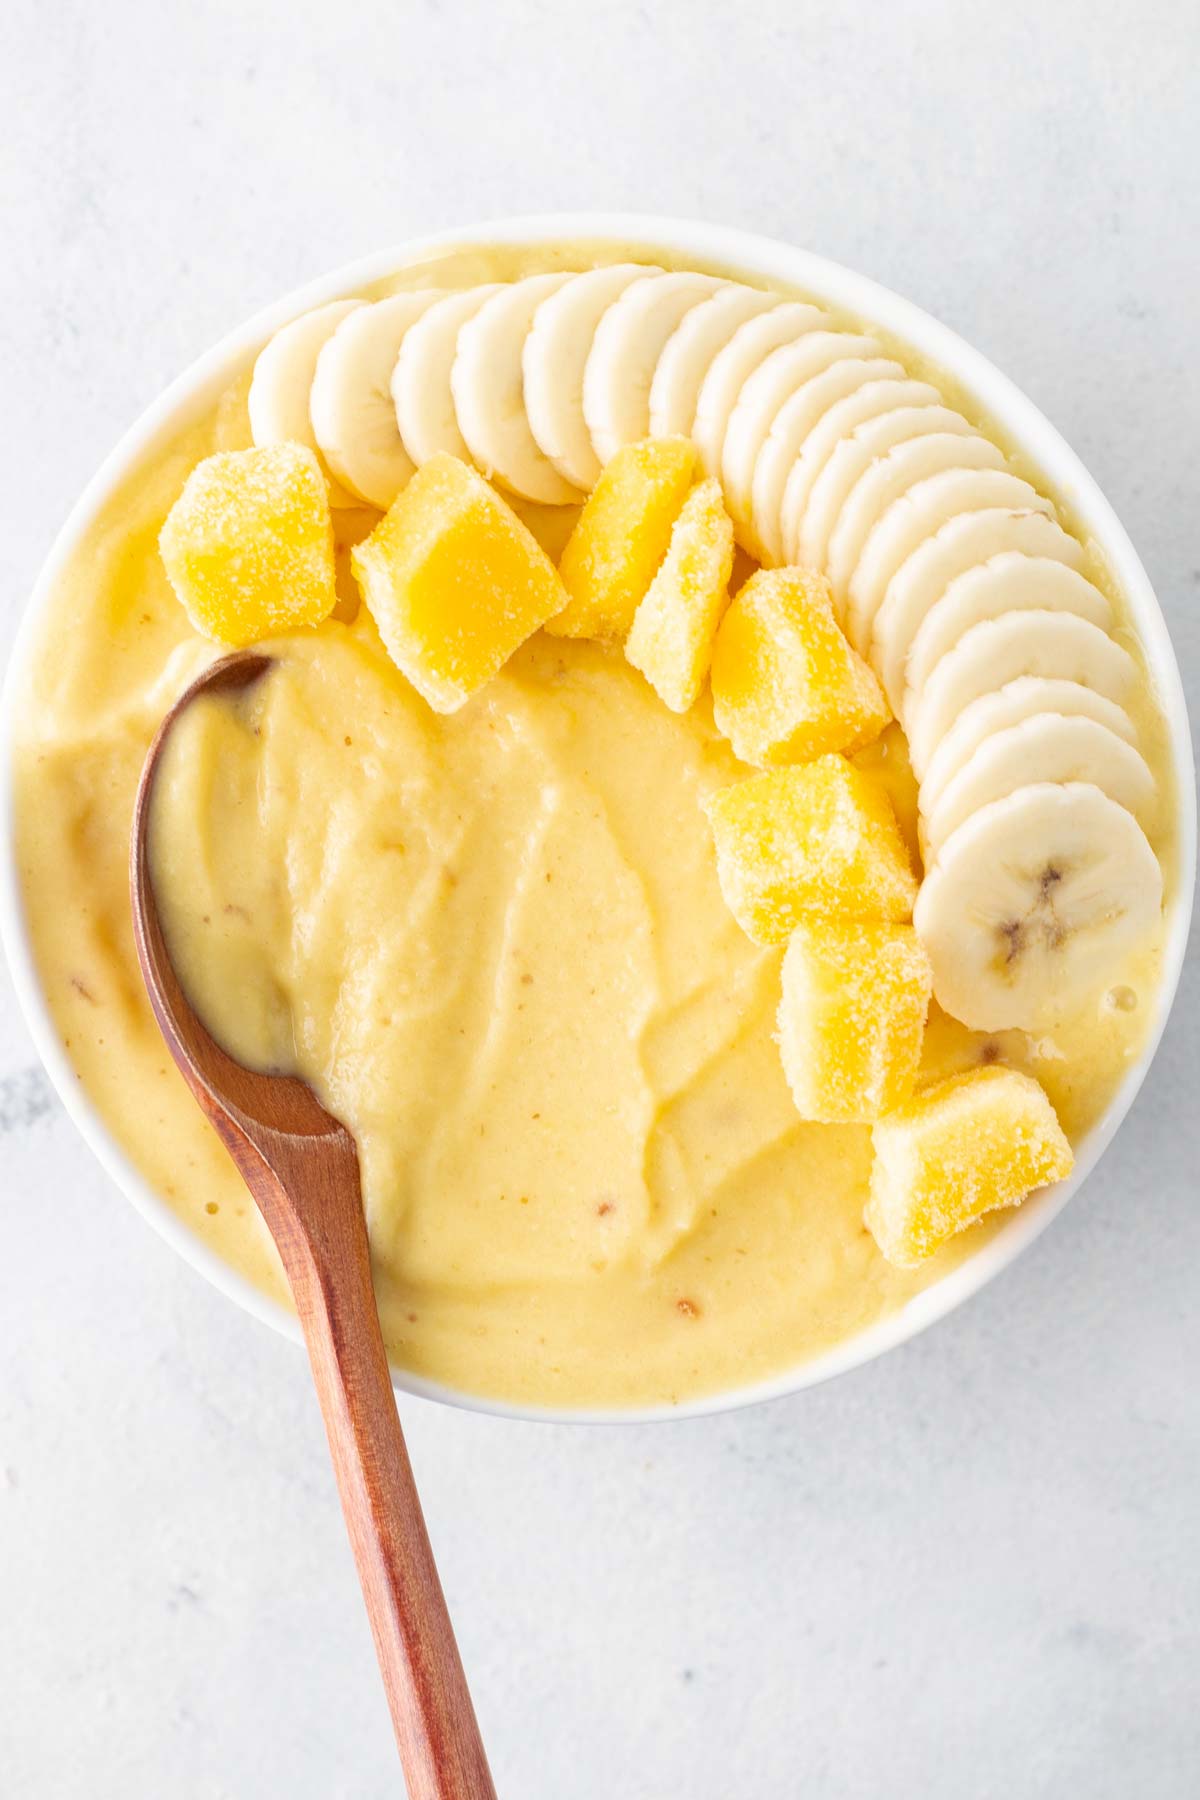 Mango smoothie bowl with a wooden spoon.